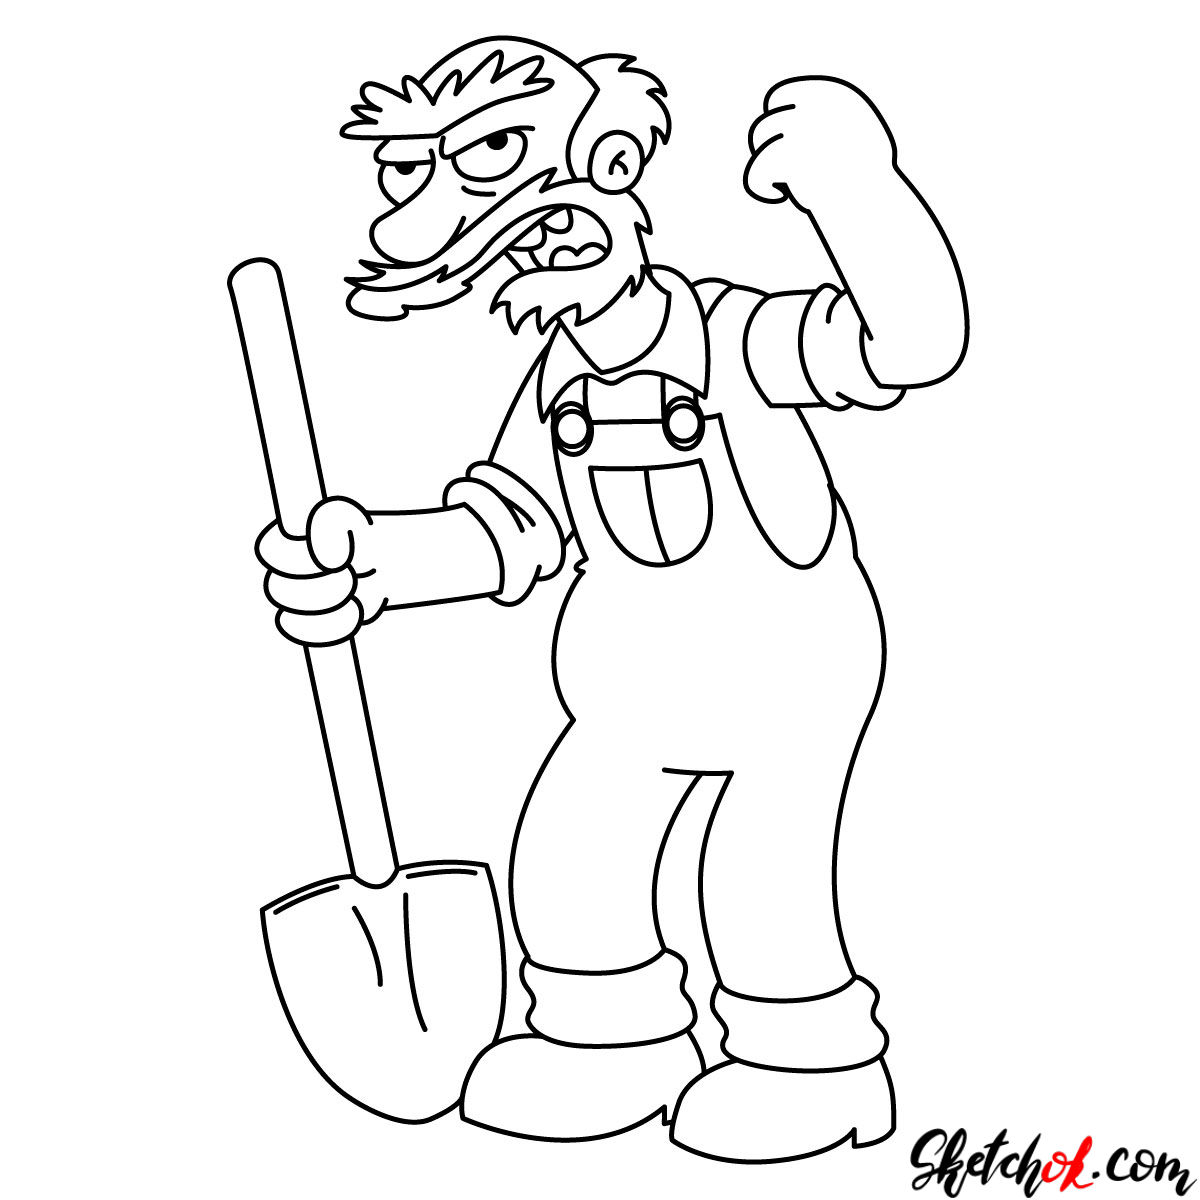 How to draw Groundskeeper Willie with a shovel - step 15